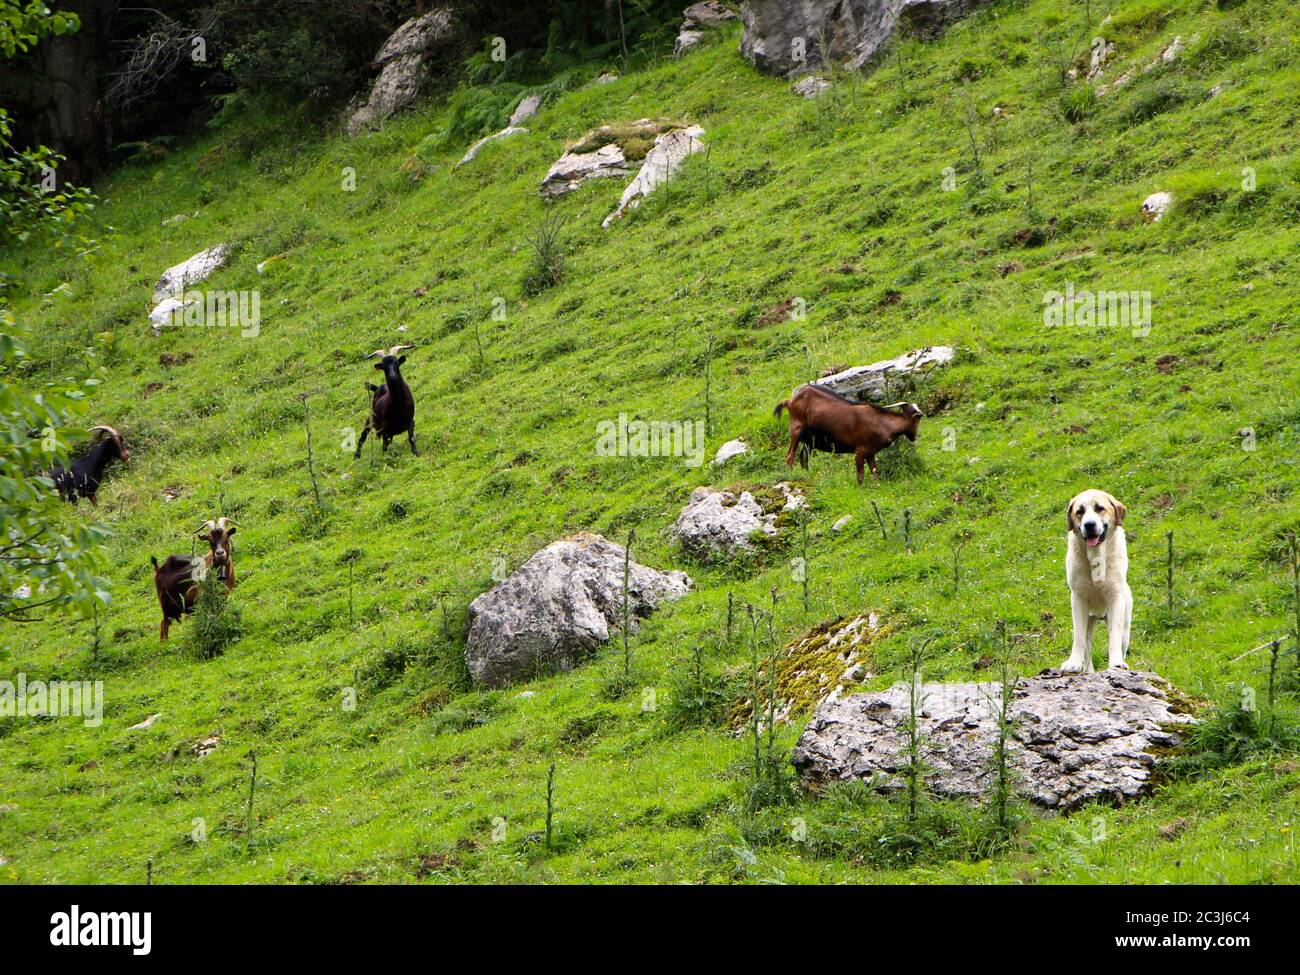 Attentive mountain dog Pyrenean Mastiff guarding a small herd of goats on a grassy mountain slope on the route to the source of the river ason Stock Photo